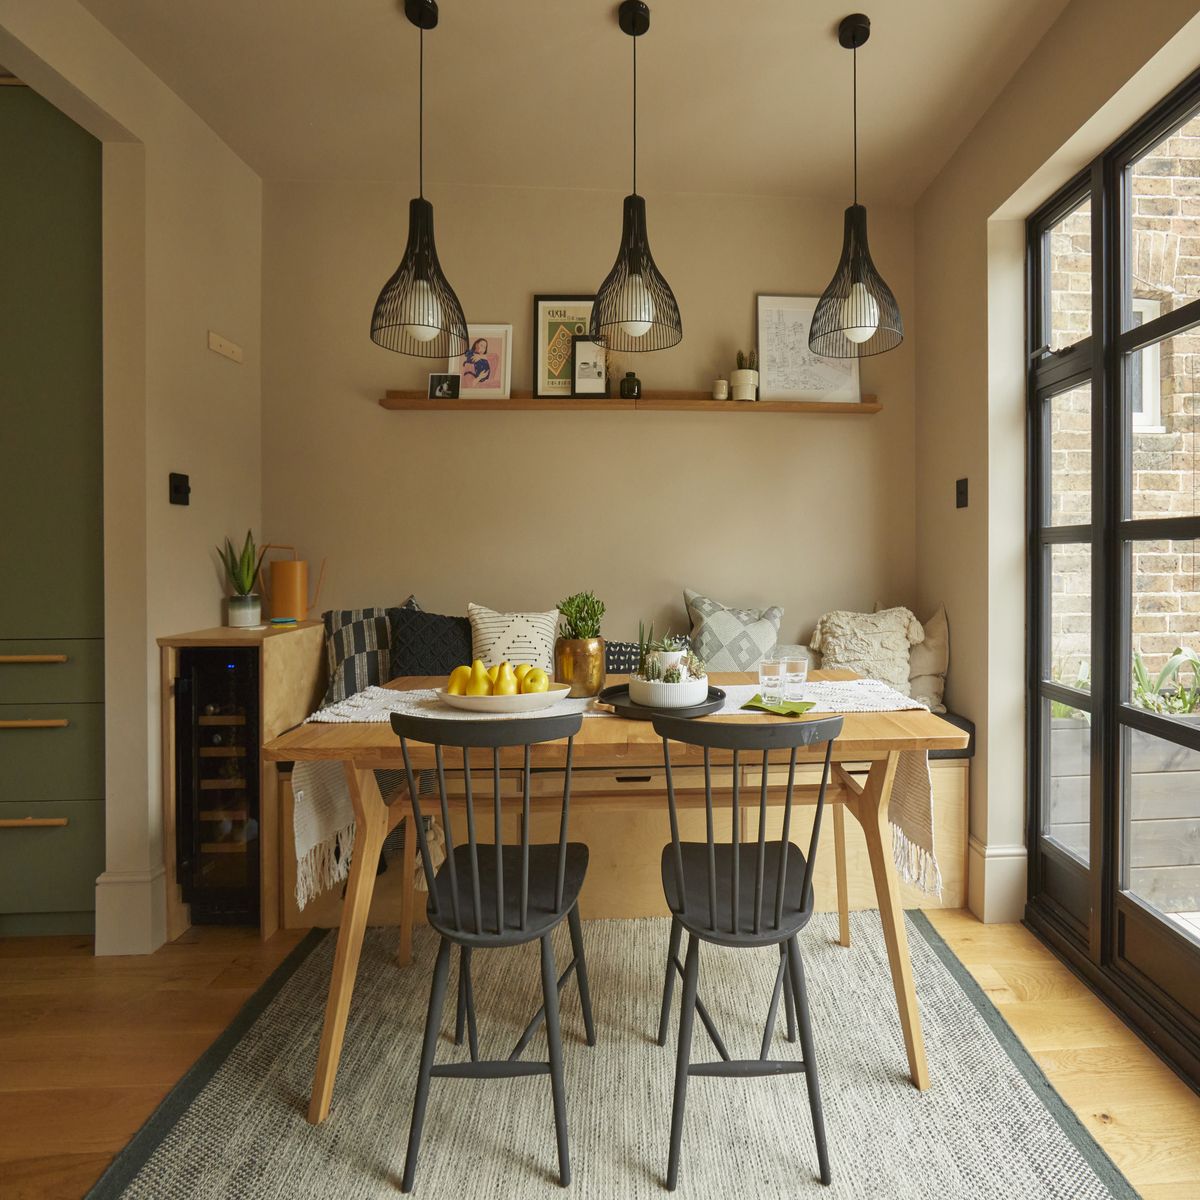 26 Kitchen lighting ideas that will make your space shine